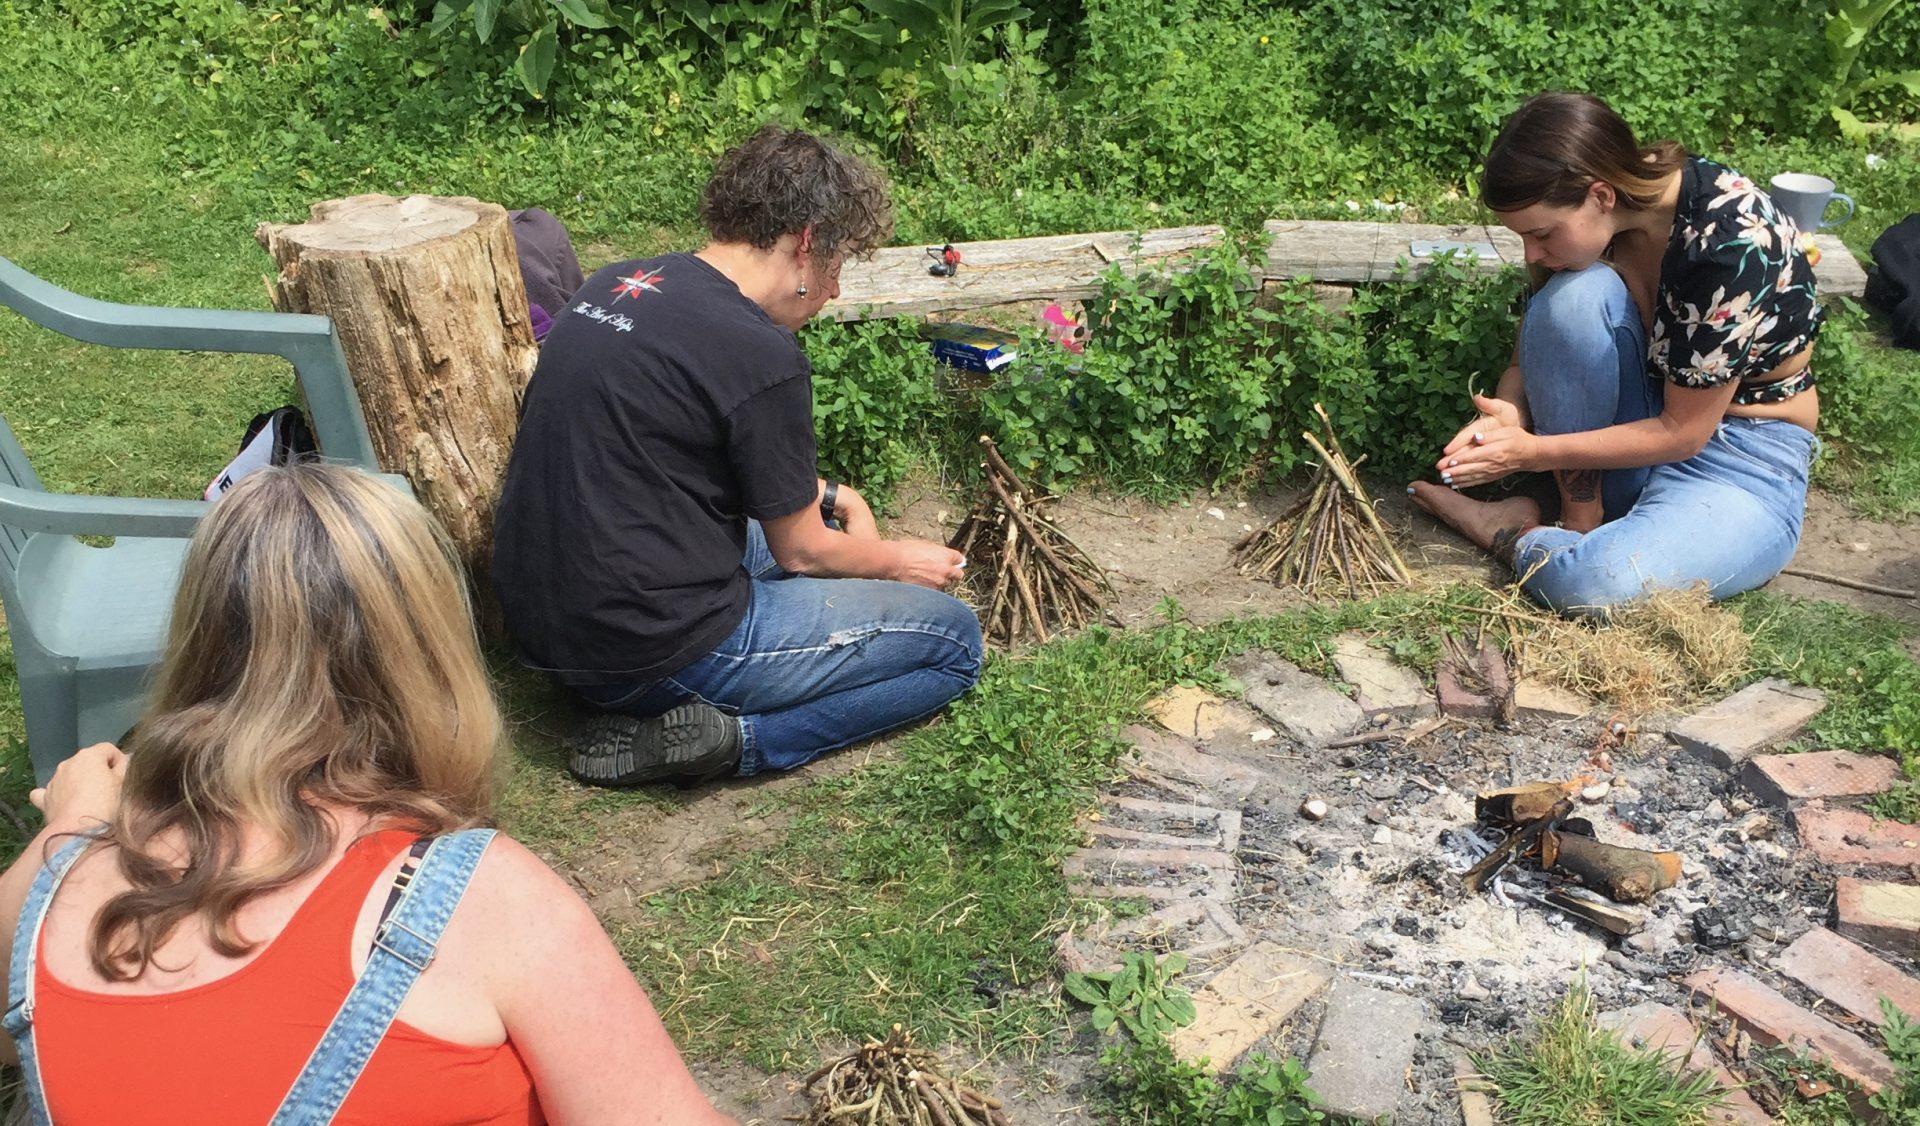 people learning fire lighting